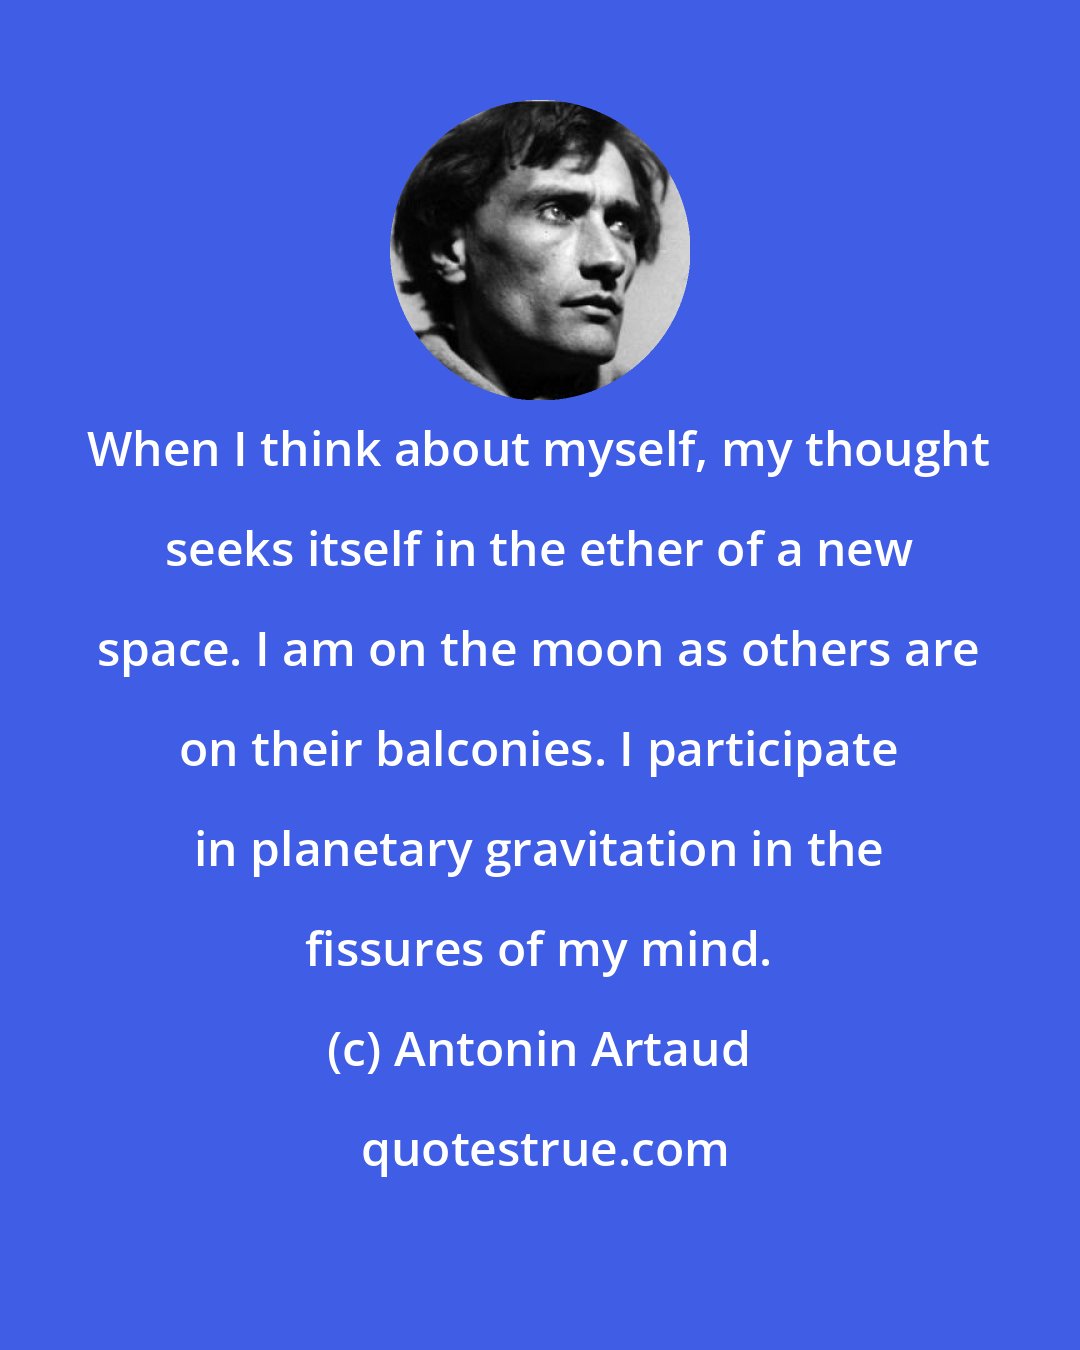 Antonin Artaud: When I think about myself, my thought seeks itself in the ether of a new space. I am on the moon as others are on their balconies. I participate in planetary gravitation in the fissures of my mind.